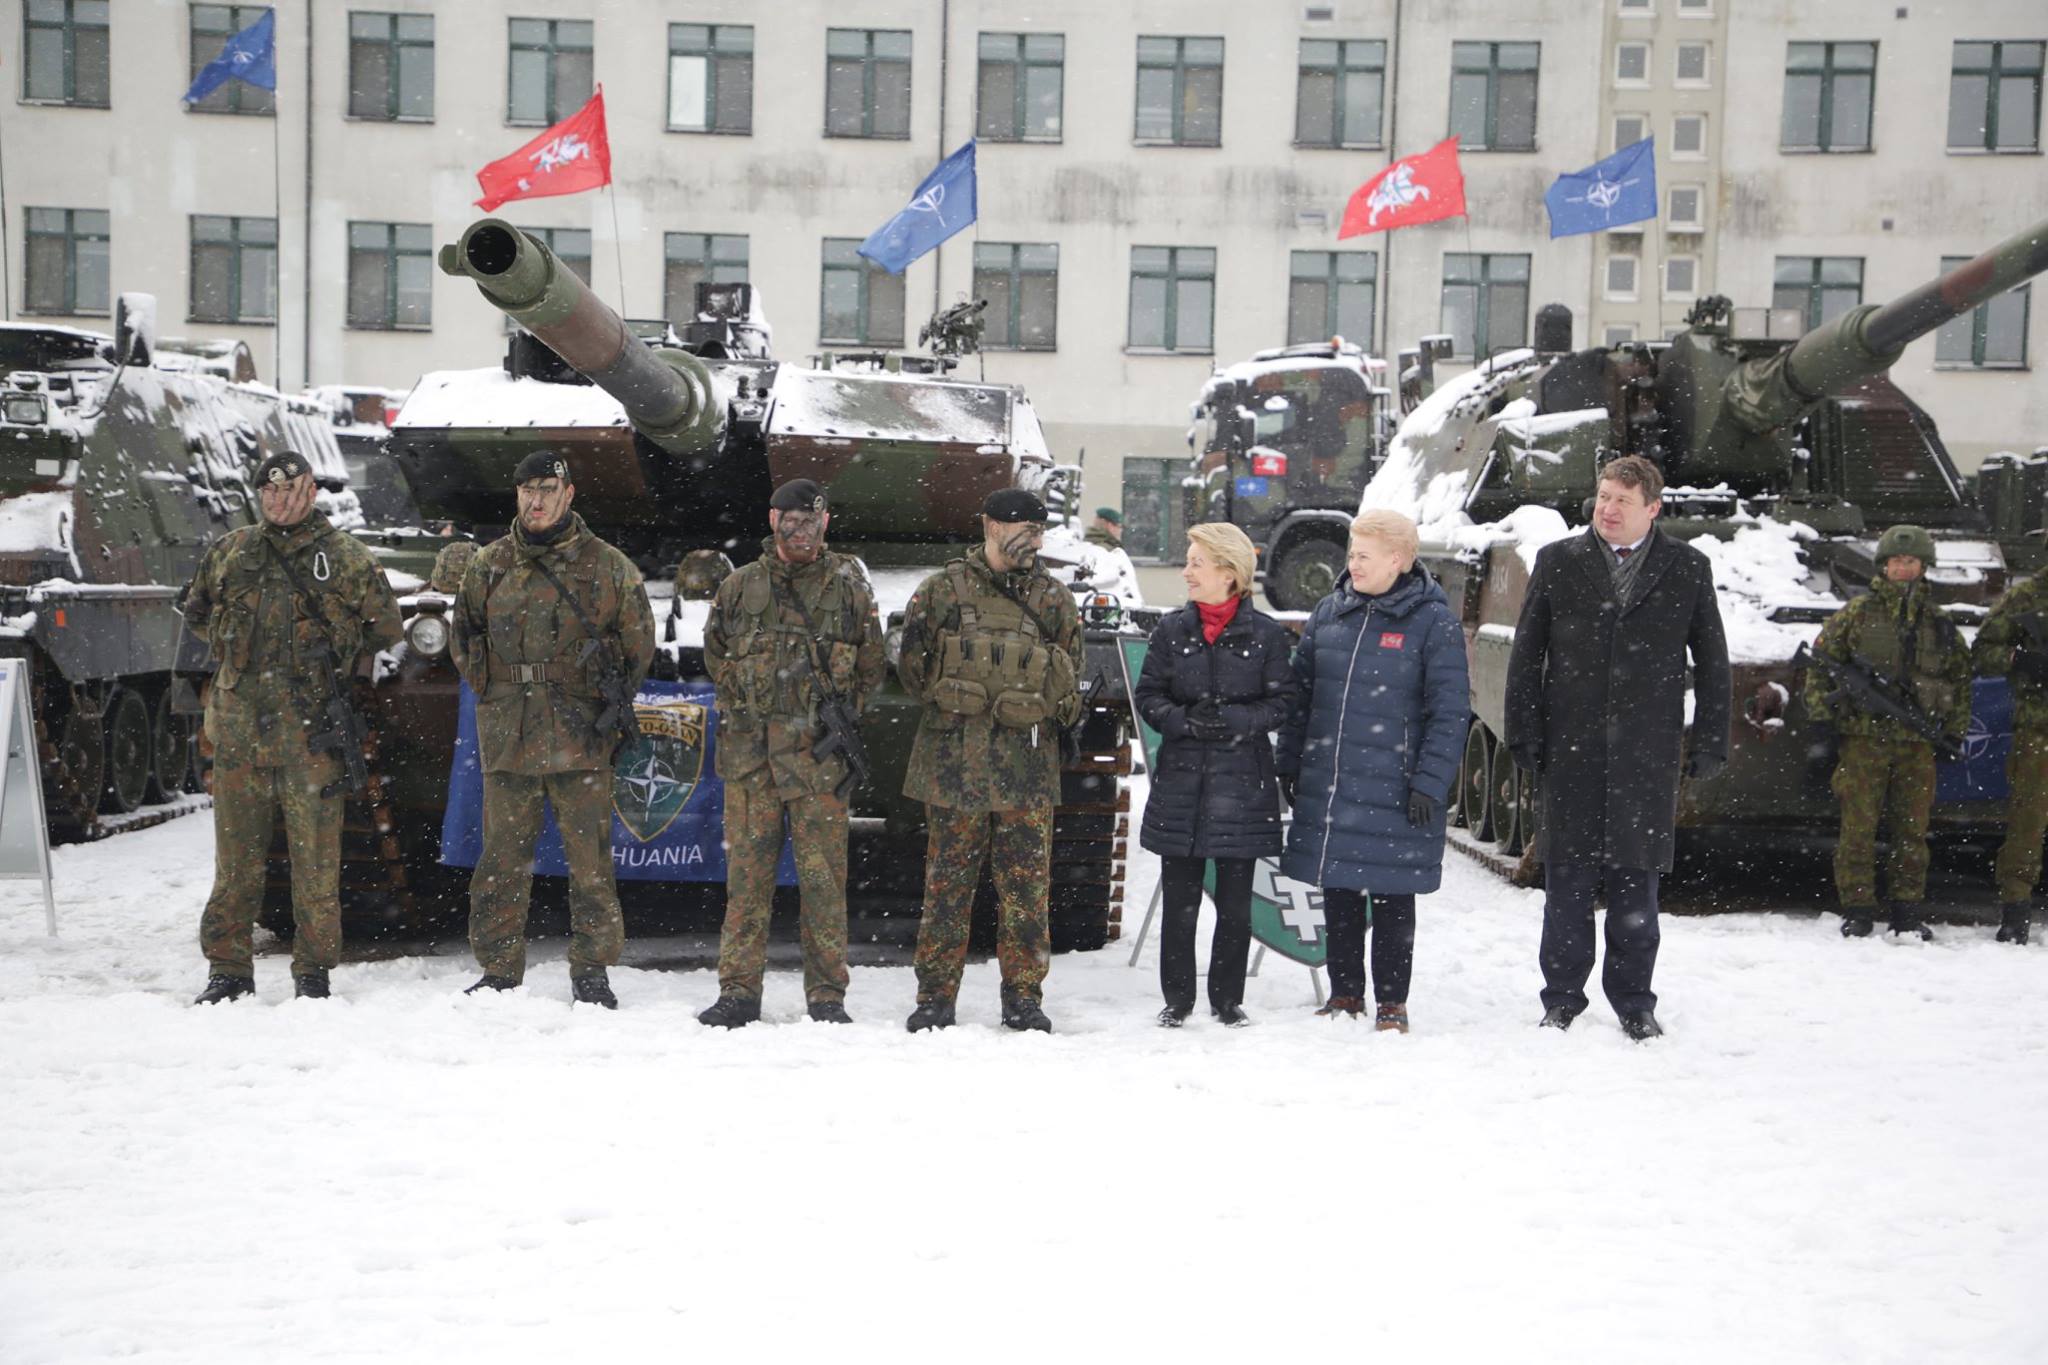 Change of command for the NATO eFP Battlegroup in Lithuania